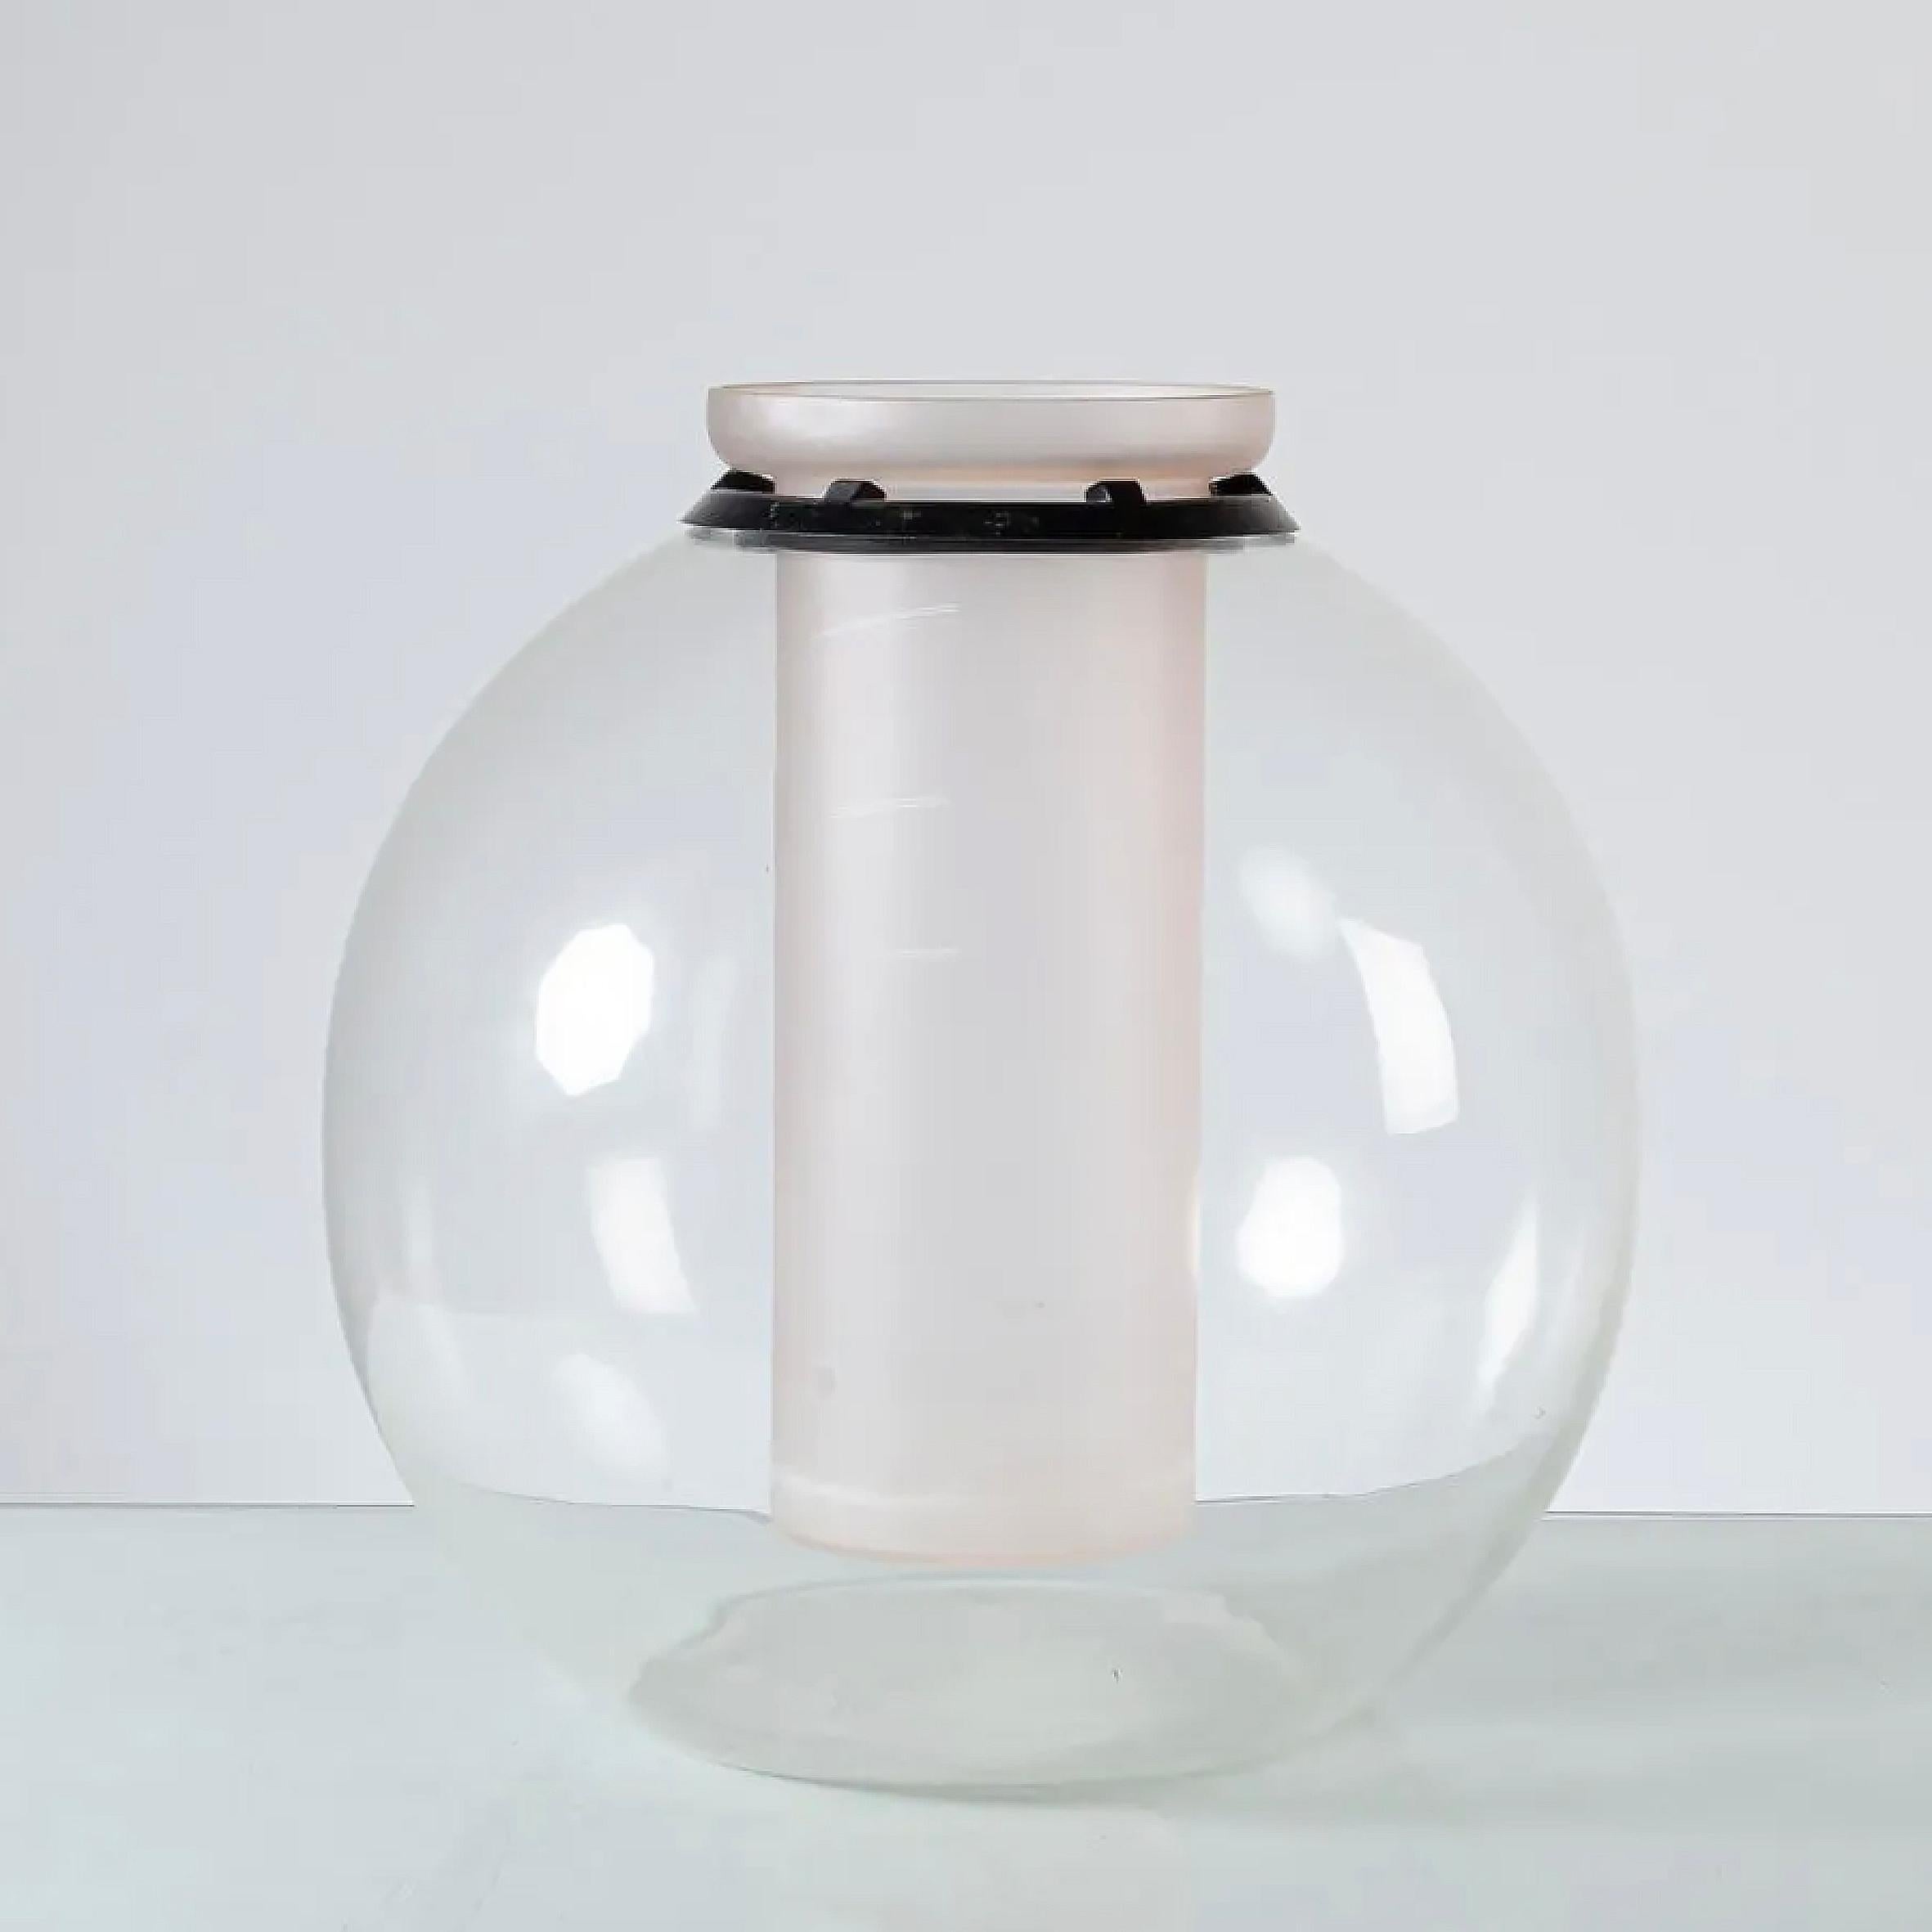 Gianfranco Frattini (1926-2004)

Sfera

A glass and crystal vase.
The spherical clear crystal vase inserted with a frosted glass flower container circled with a protective black rubber ring. 
Manufactured by Progetti, Italy.


Gianfranco Frattini